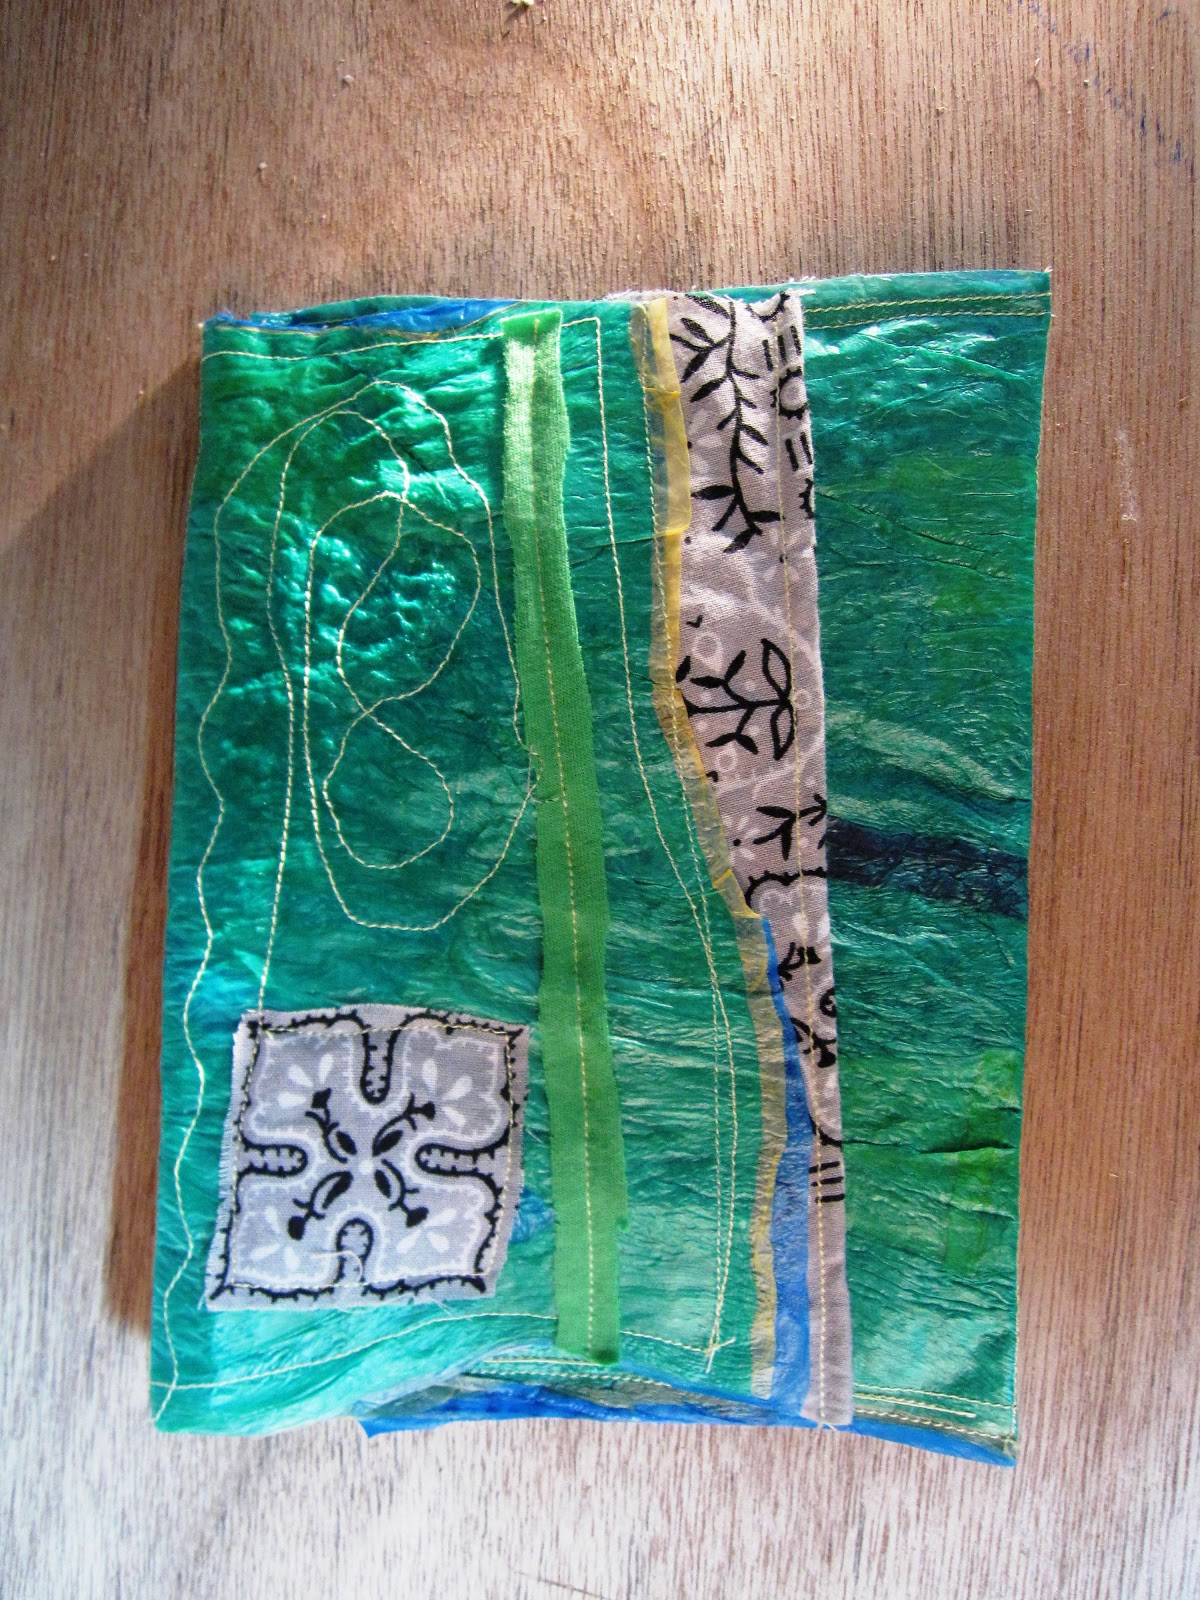 My Upcycled Life: fused plastic bags